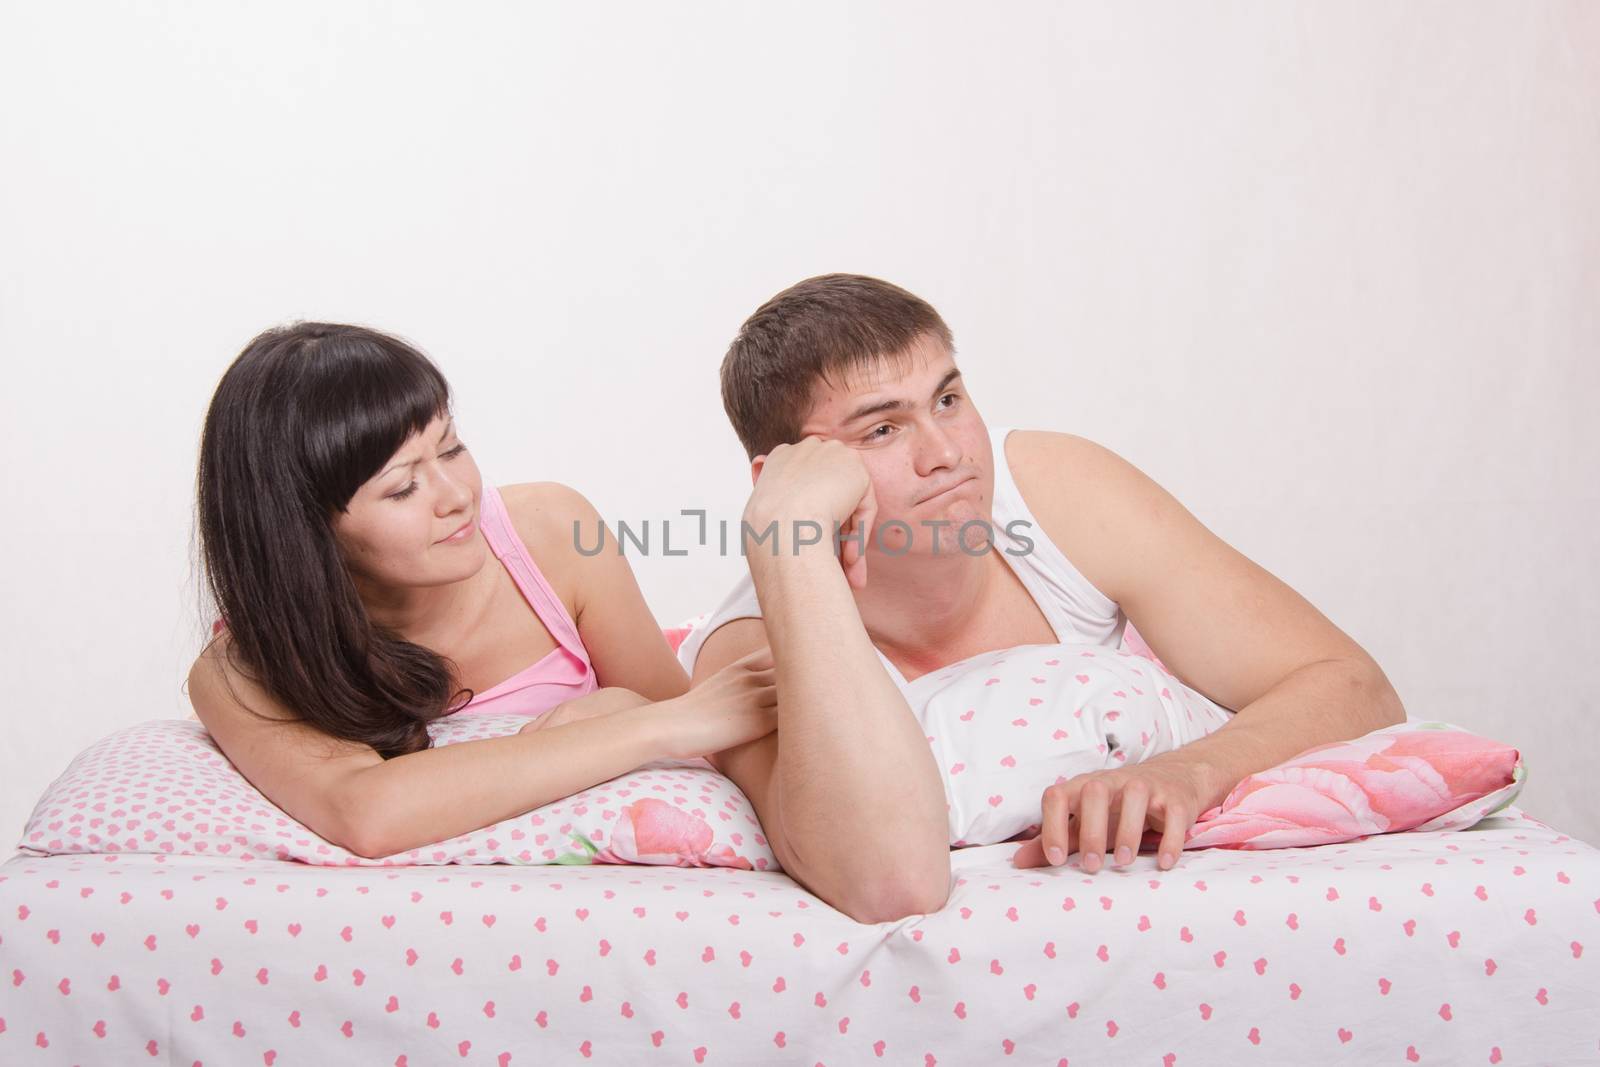 Husband was offended by his wife, resting in bed by Madhourse